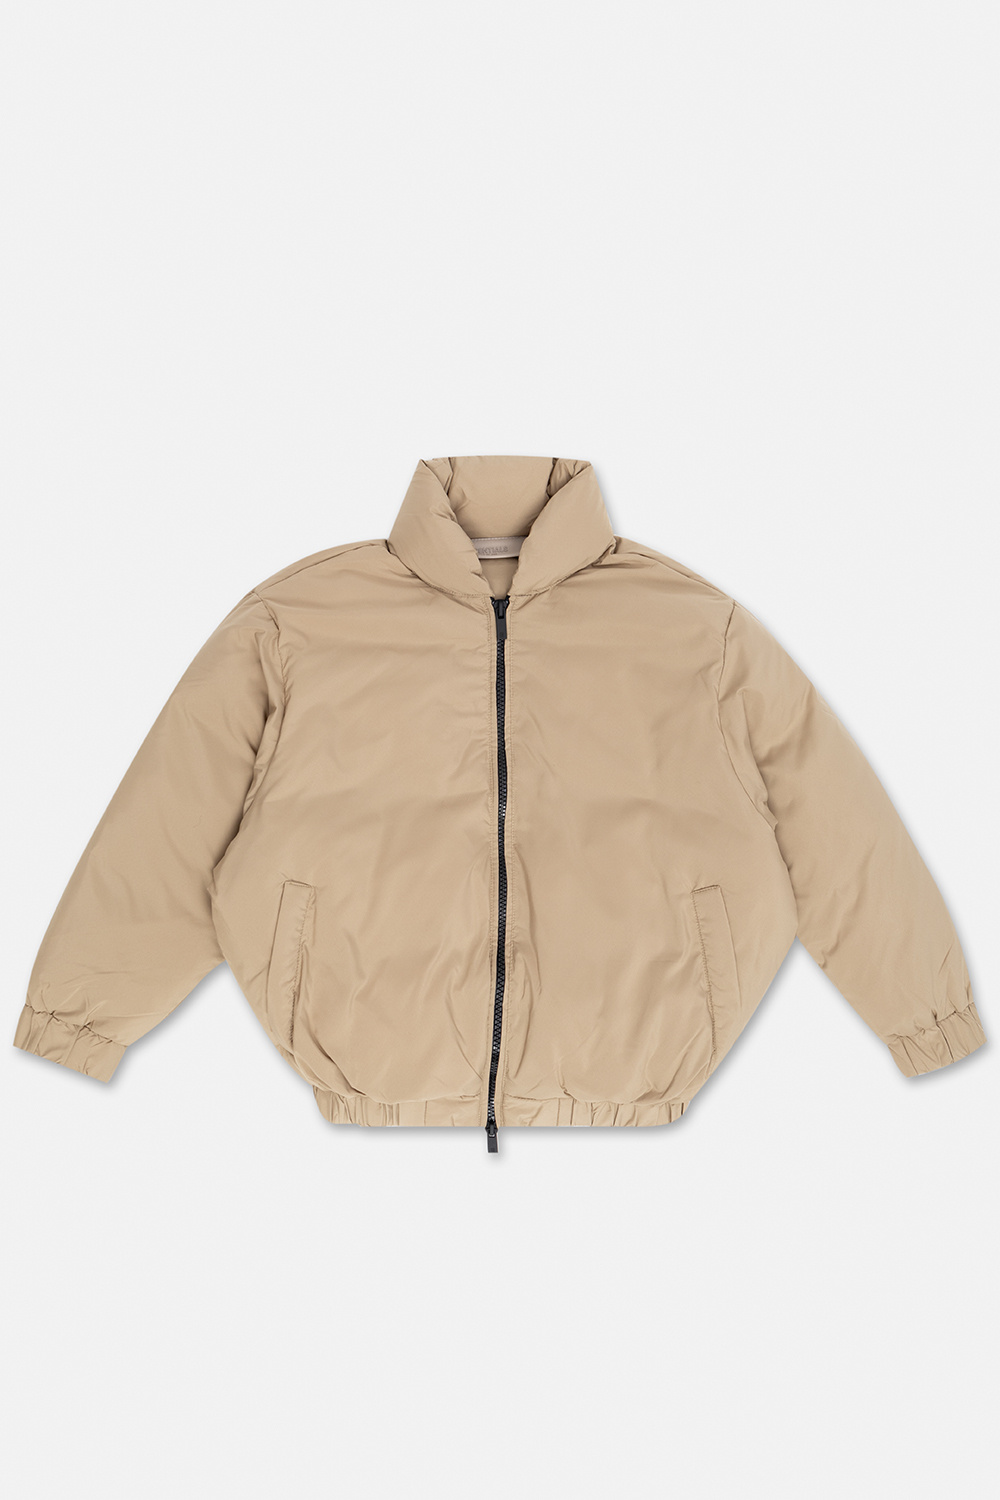 Fear Of God Essentials Kids Insulated jacket